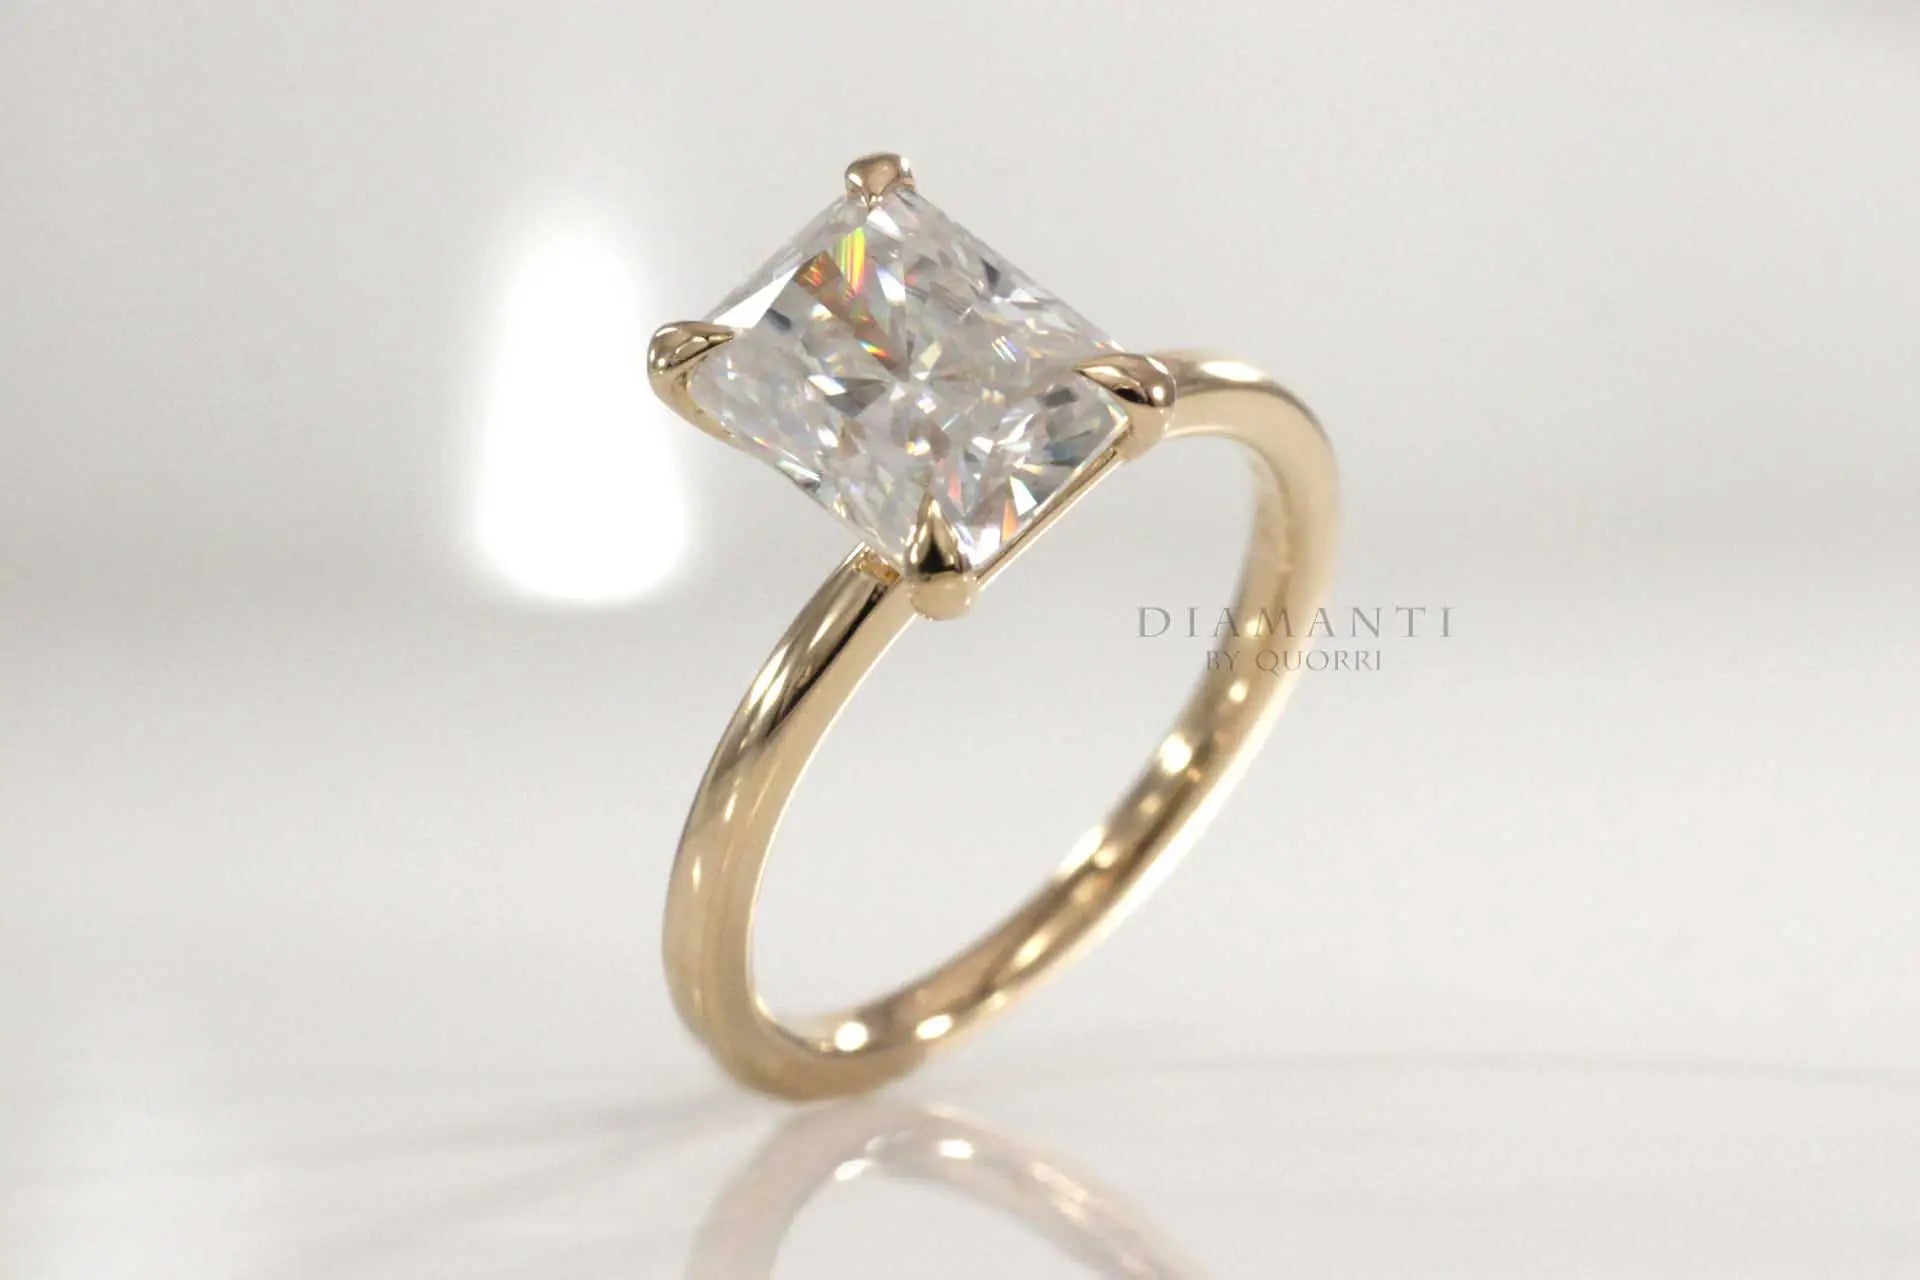 affordable claw prong 14k yellow gold 3 carat radiant lab grown diamond engagement ring Quorri